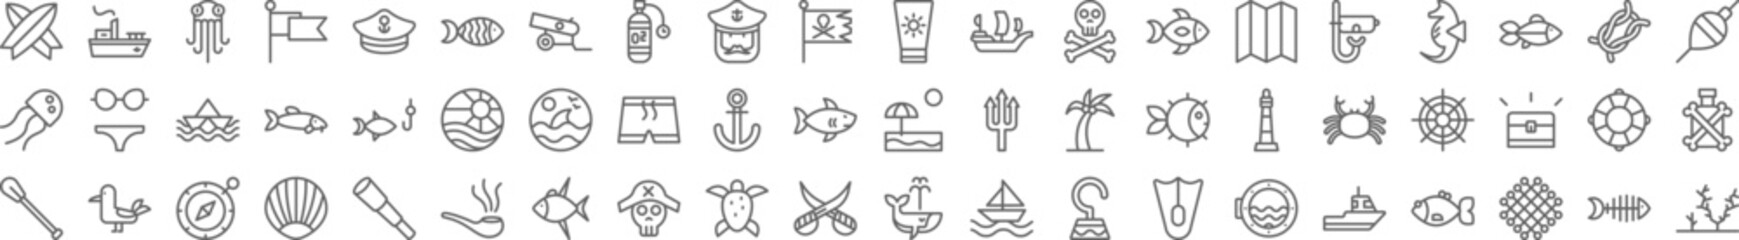 Seaside icons collection vector illustration design